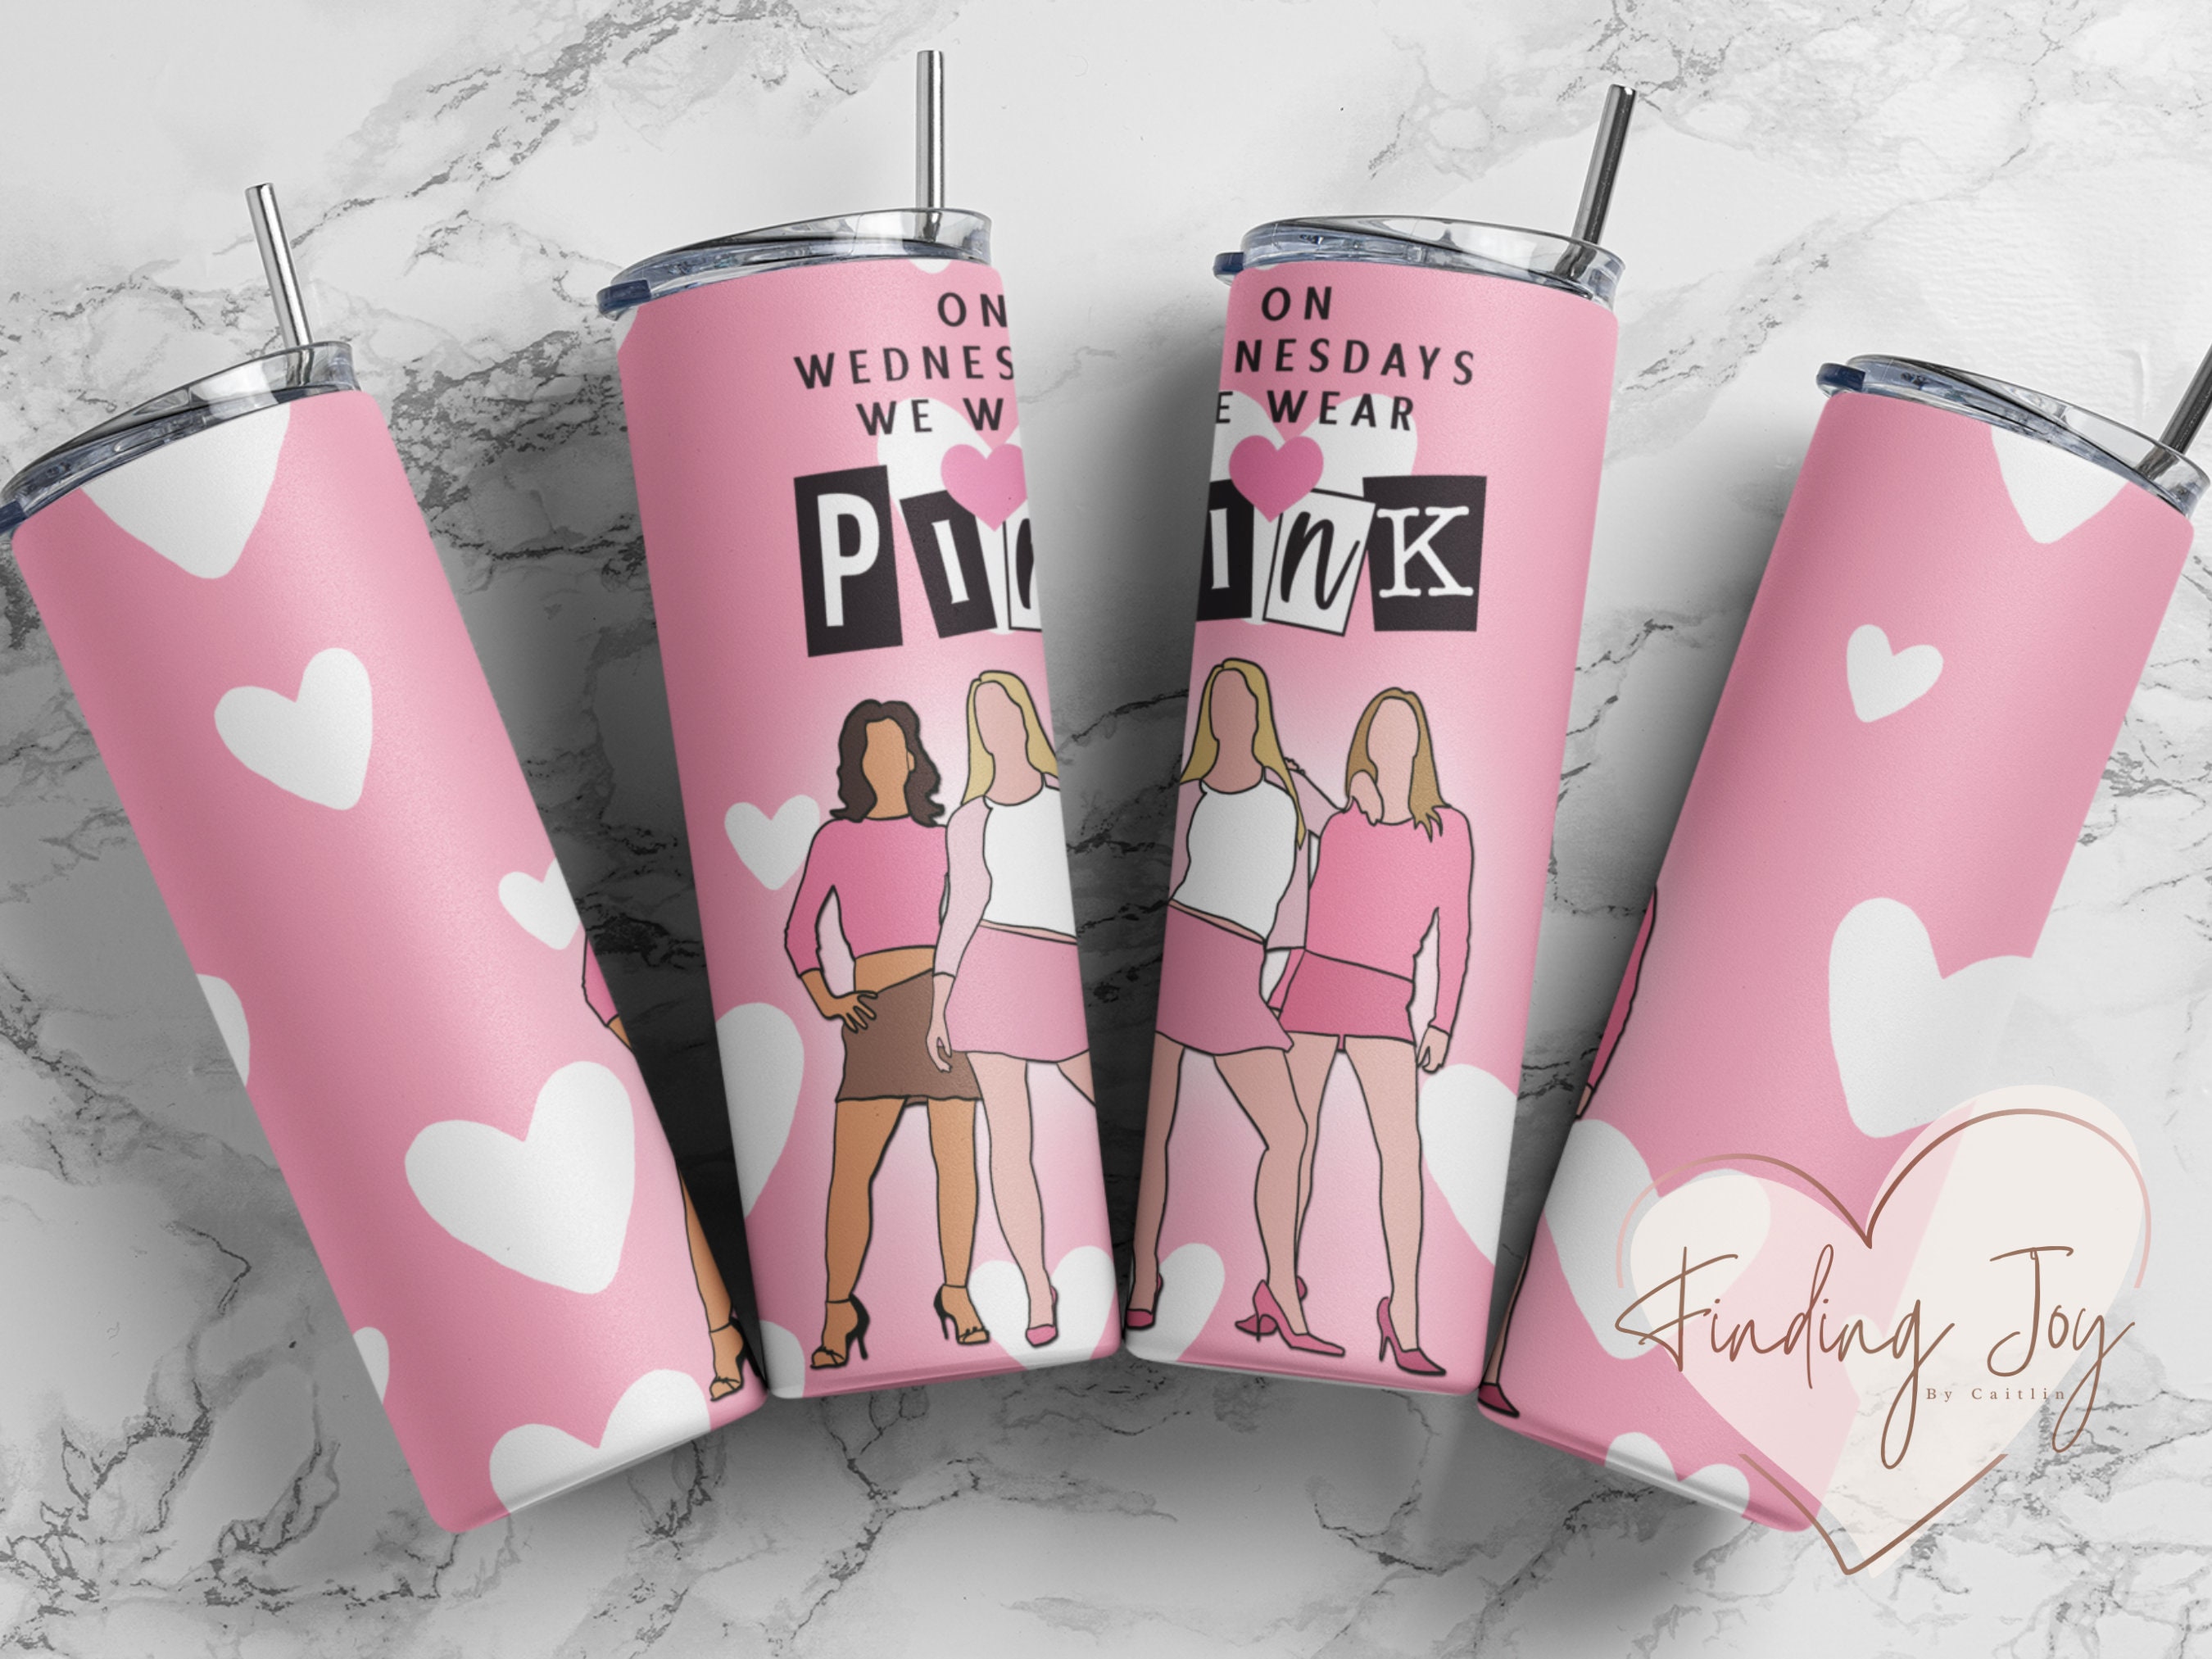 Girls are Mean - Vinyl Cup Wrap